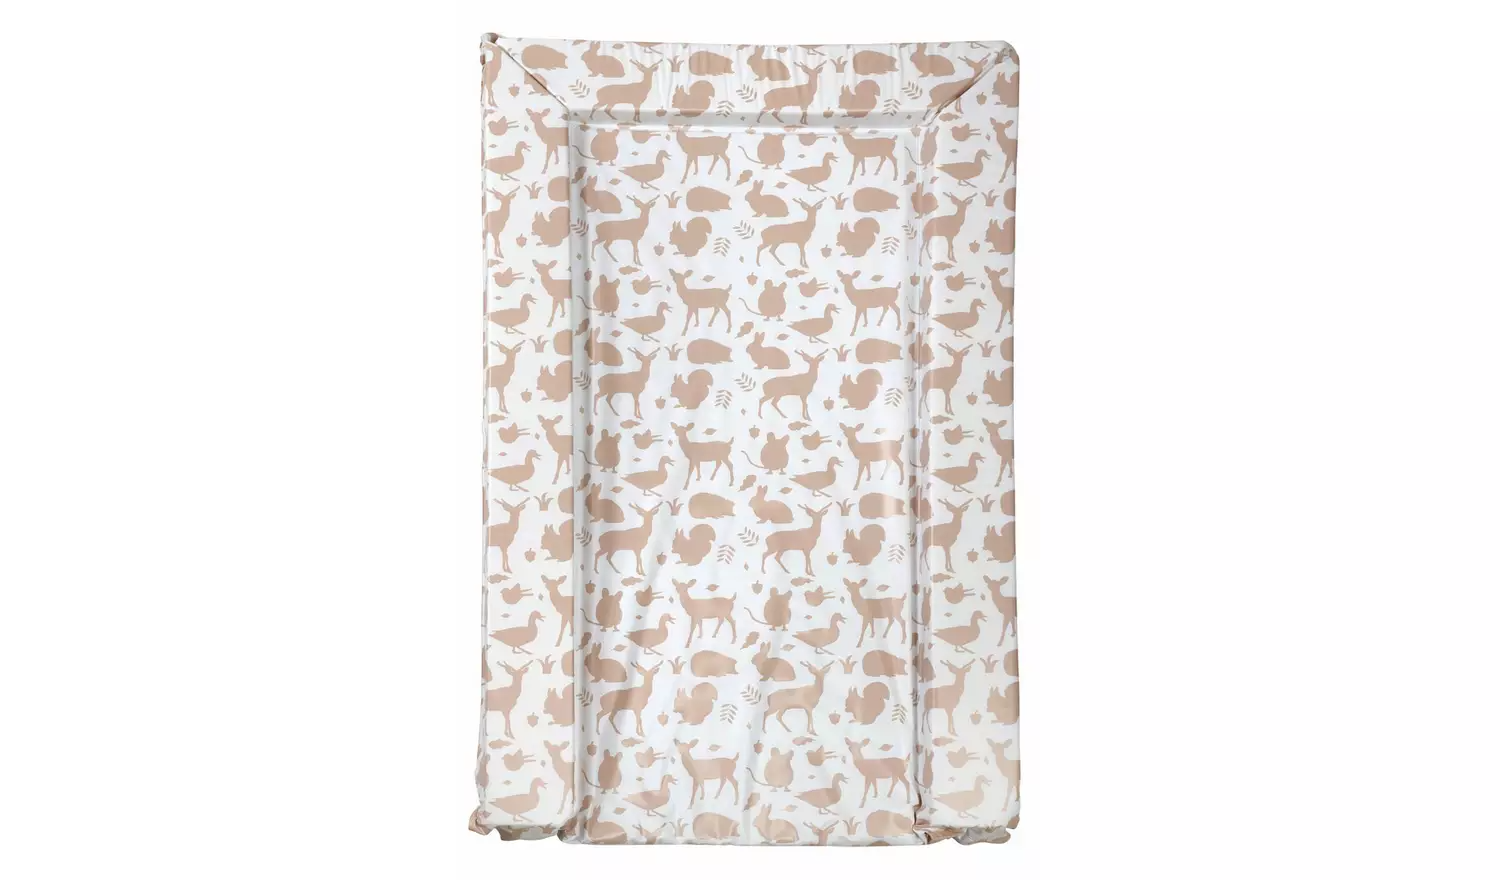 East Coast Nursery In The Woods Pack of 2 Changing Mat – Tan